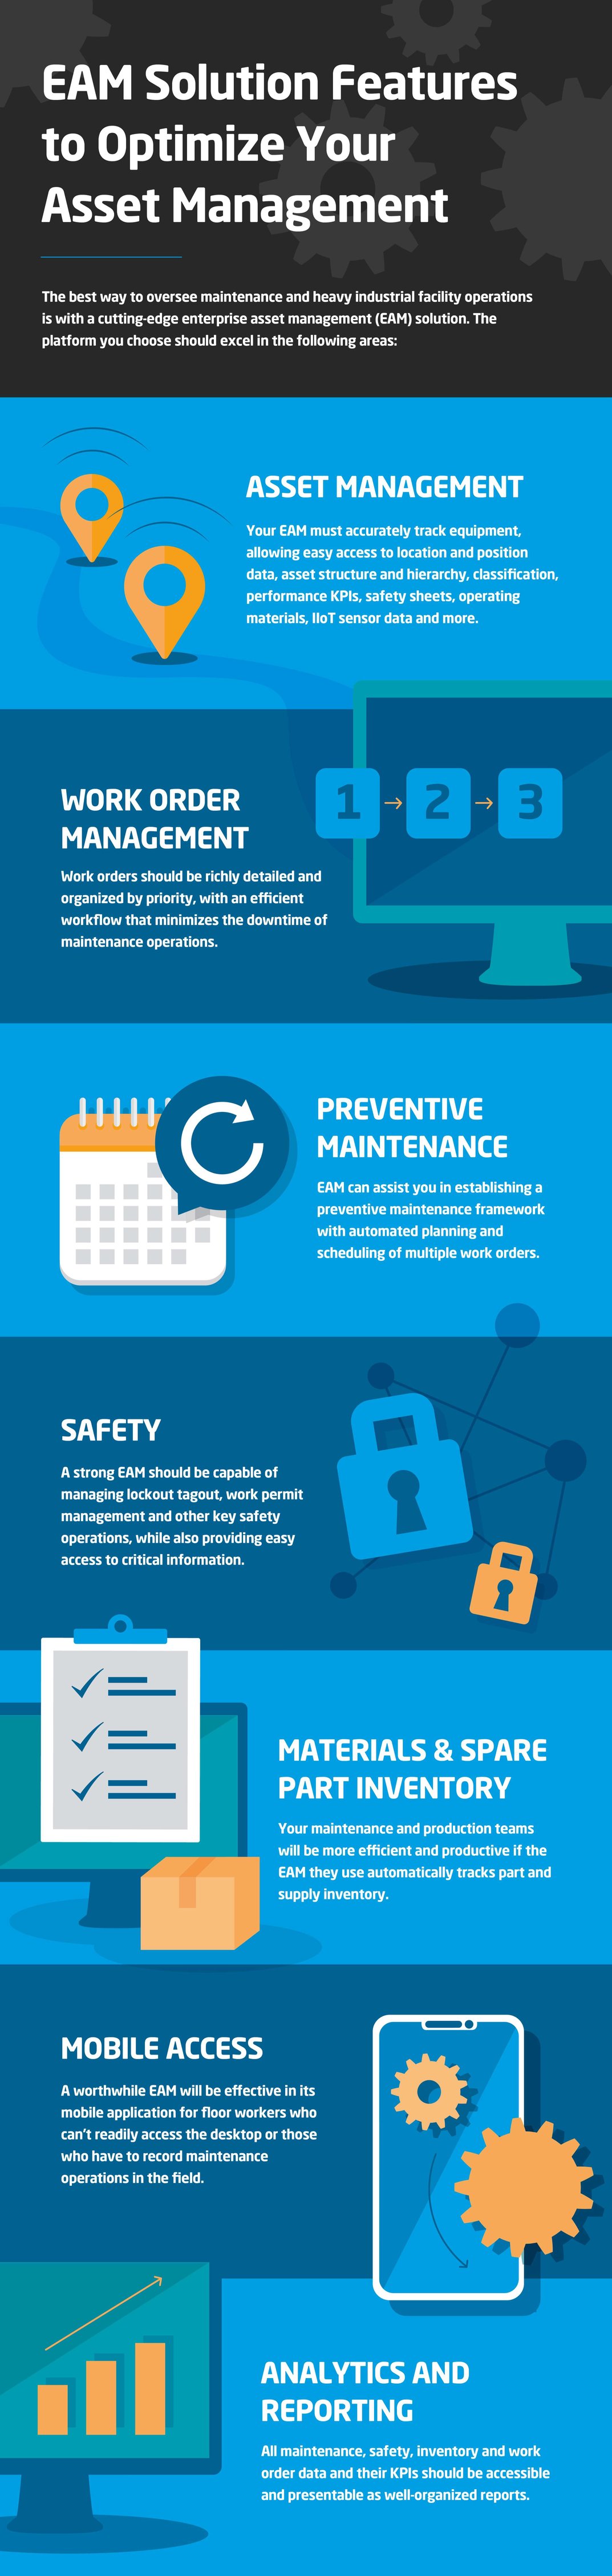 Infographic - EAM Solution Features to Optimize Your Asset Management-1